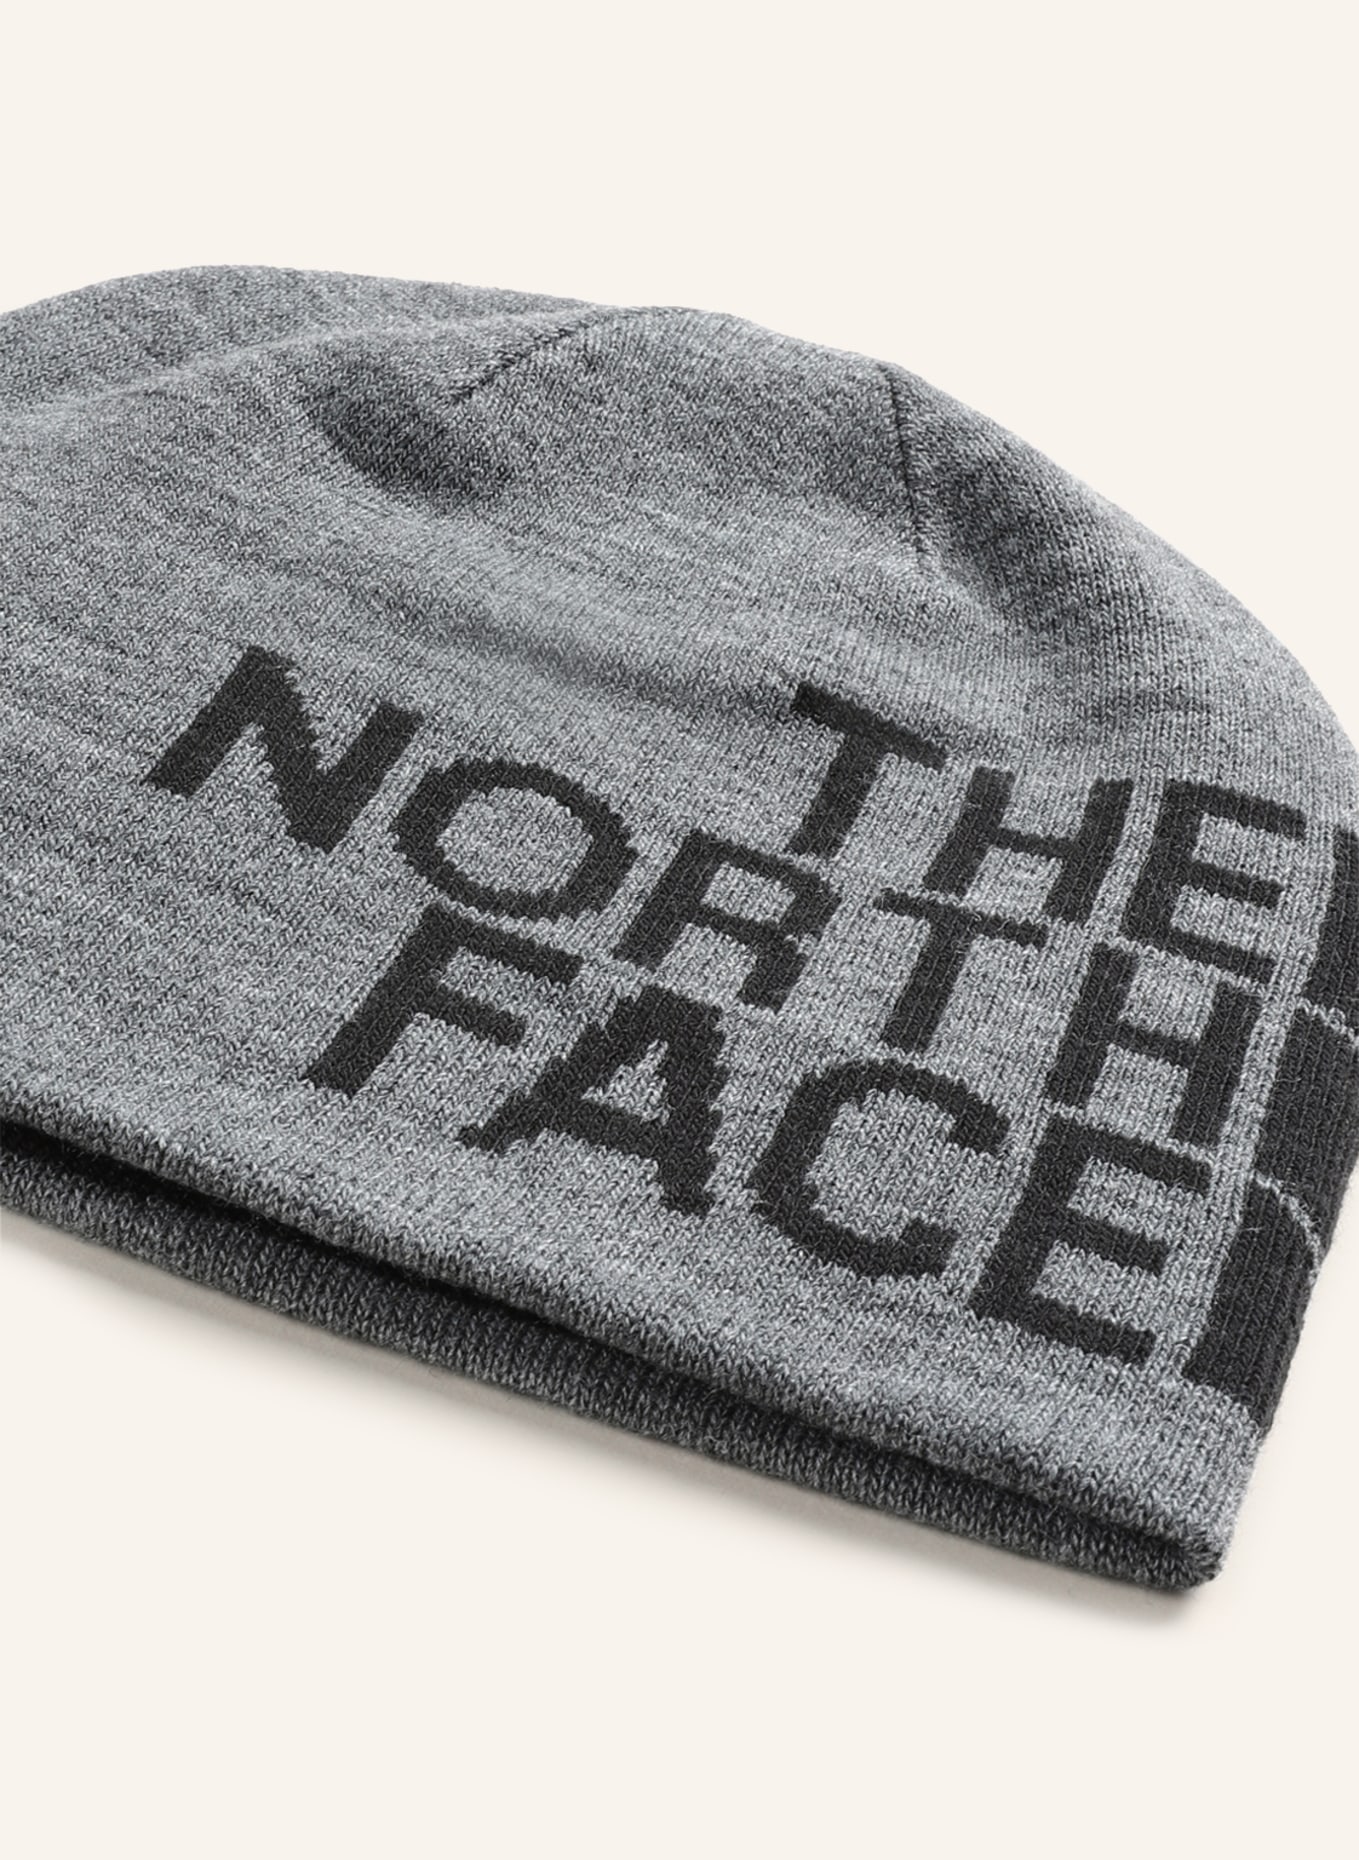 BANNER FACE Beanie THE reversible gray TNF in NORTH